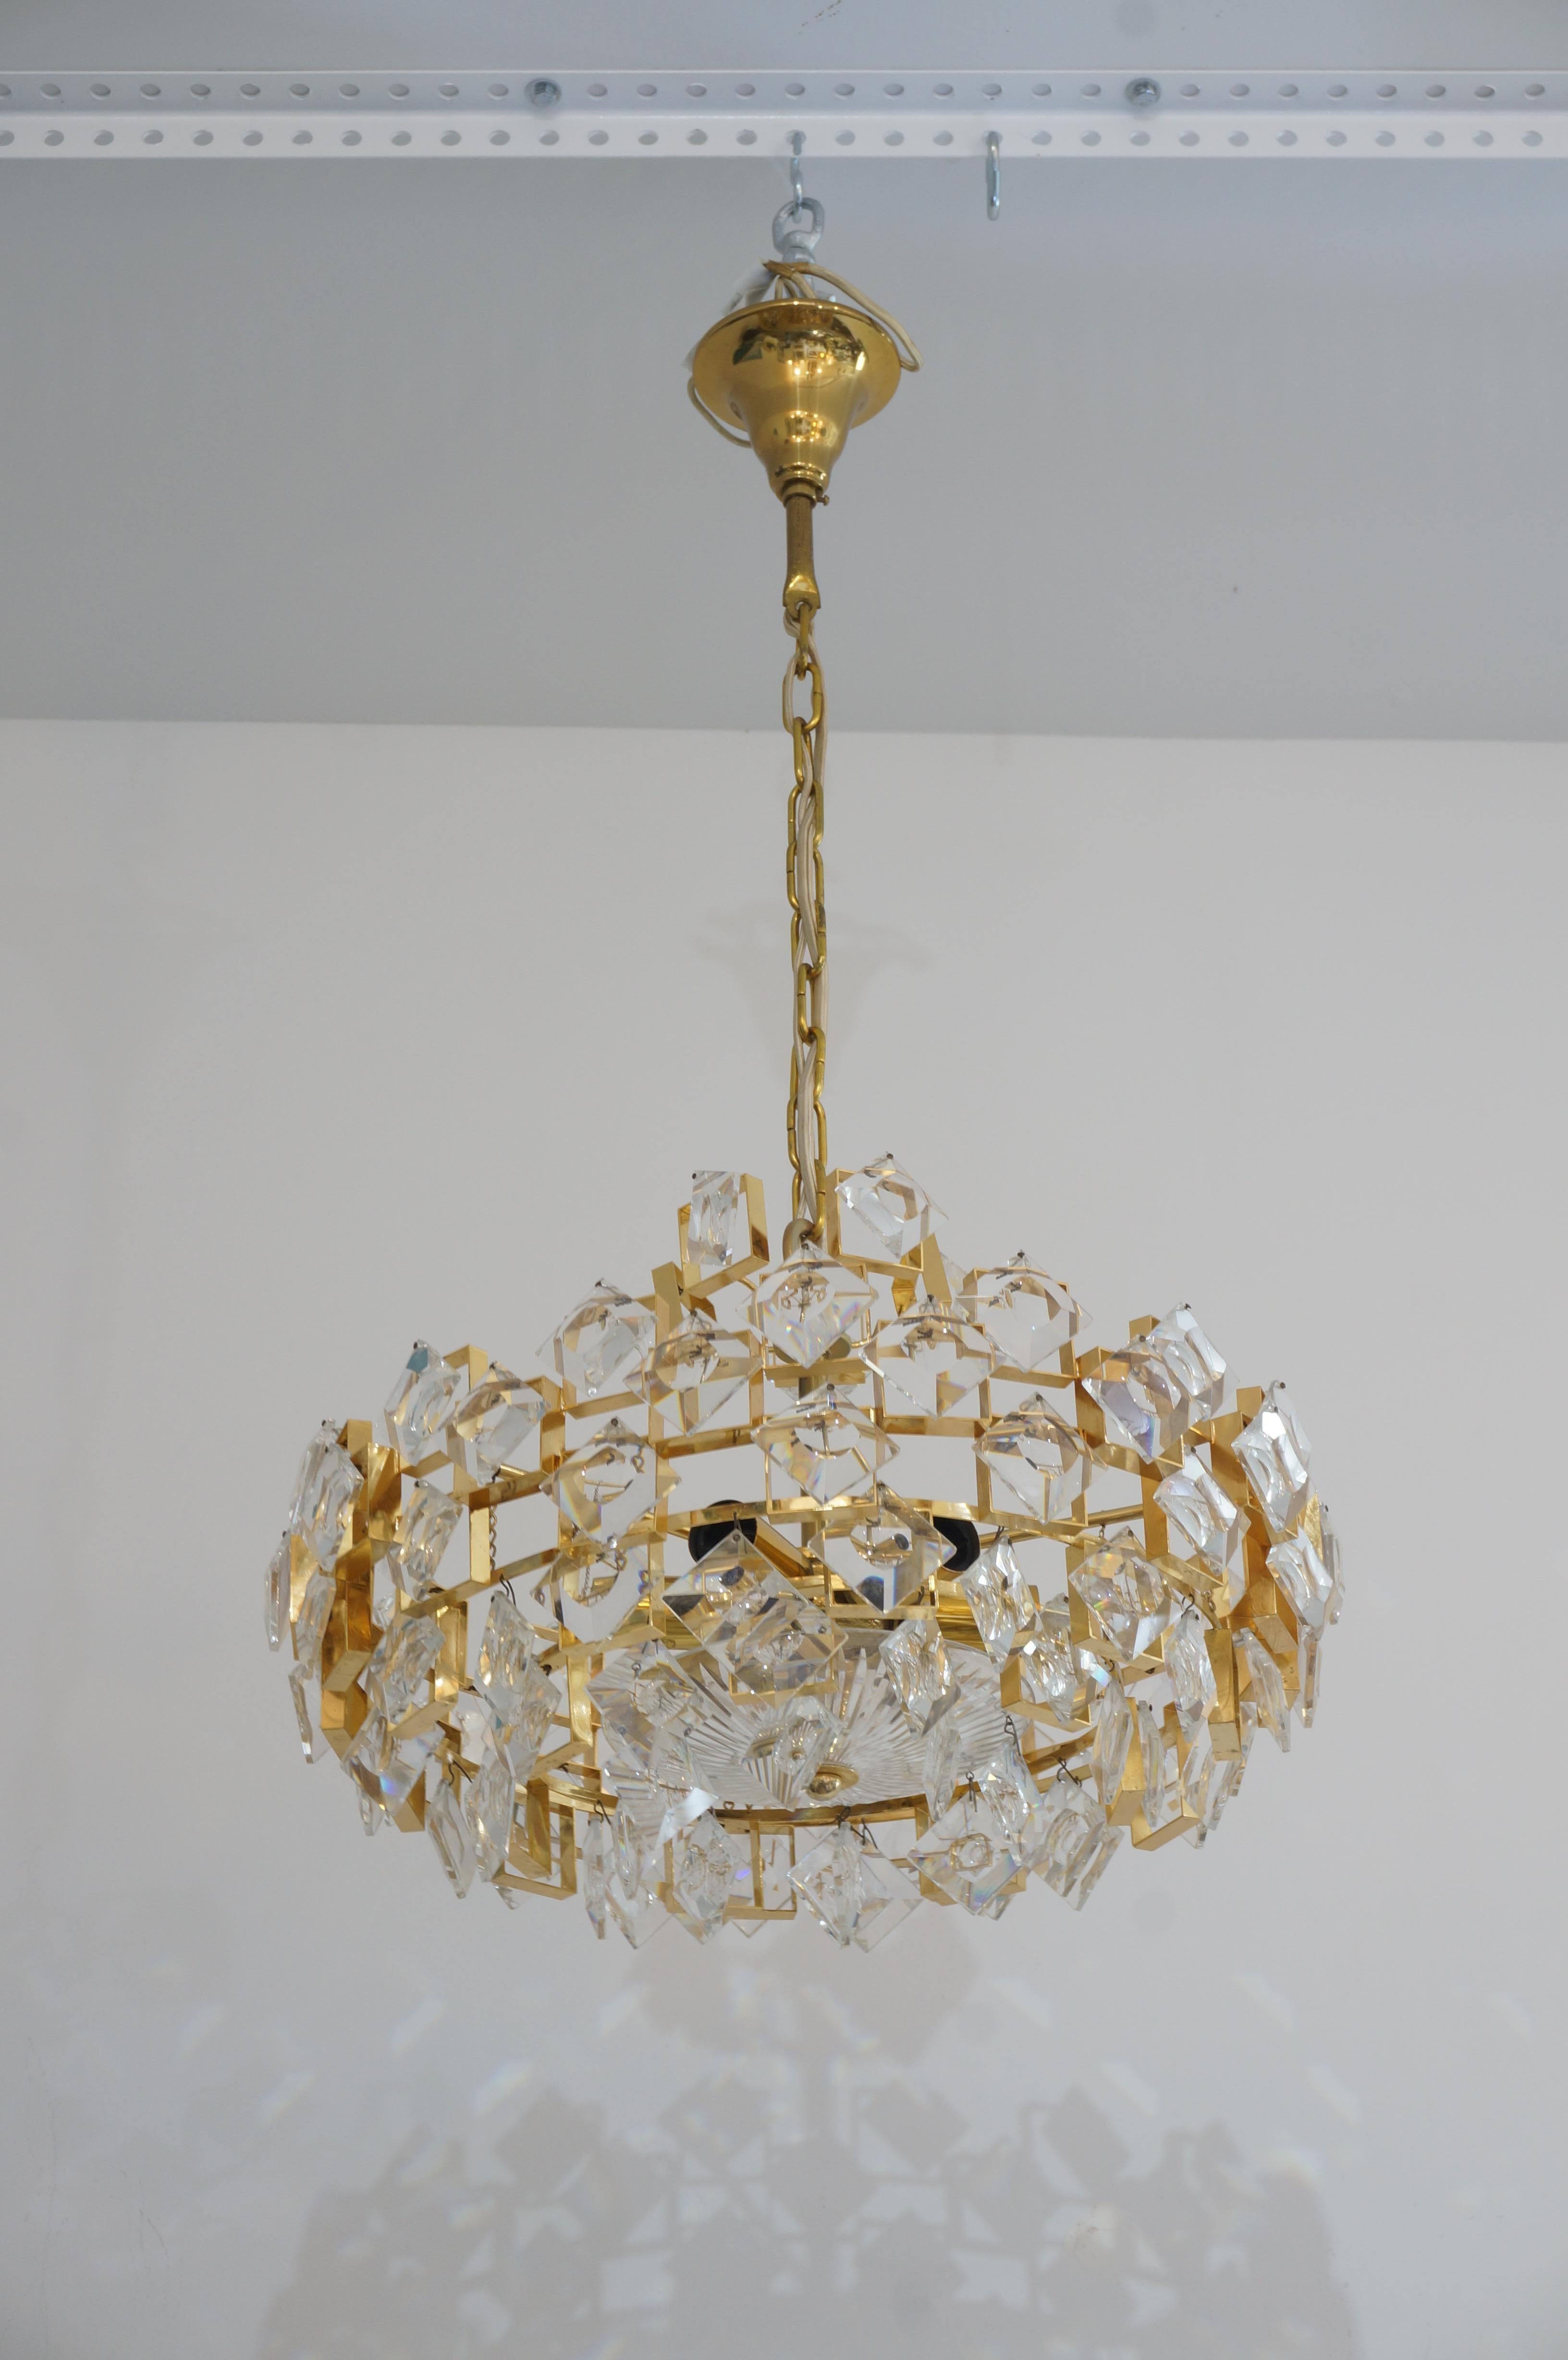 This stylish and elegant 1970s Palme & Walter chandelier is fabricated in gold plate and cut-crystal.

Note: Requires six E14 light bulbs.